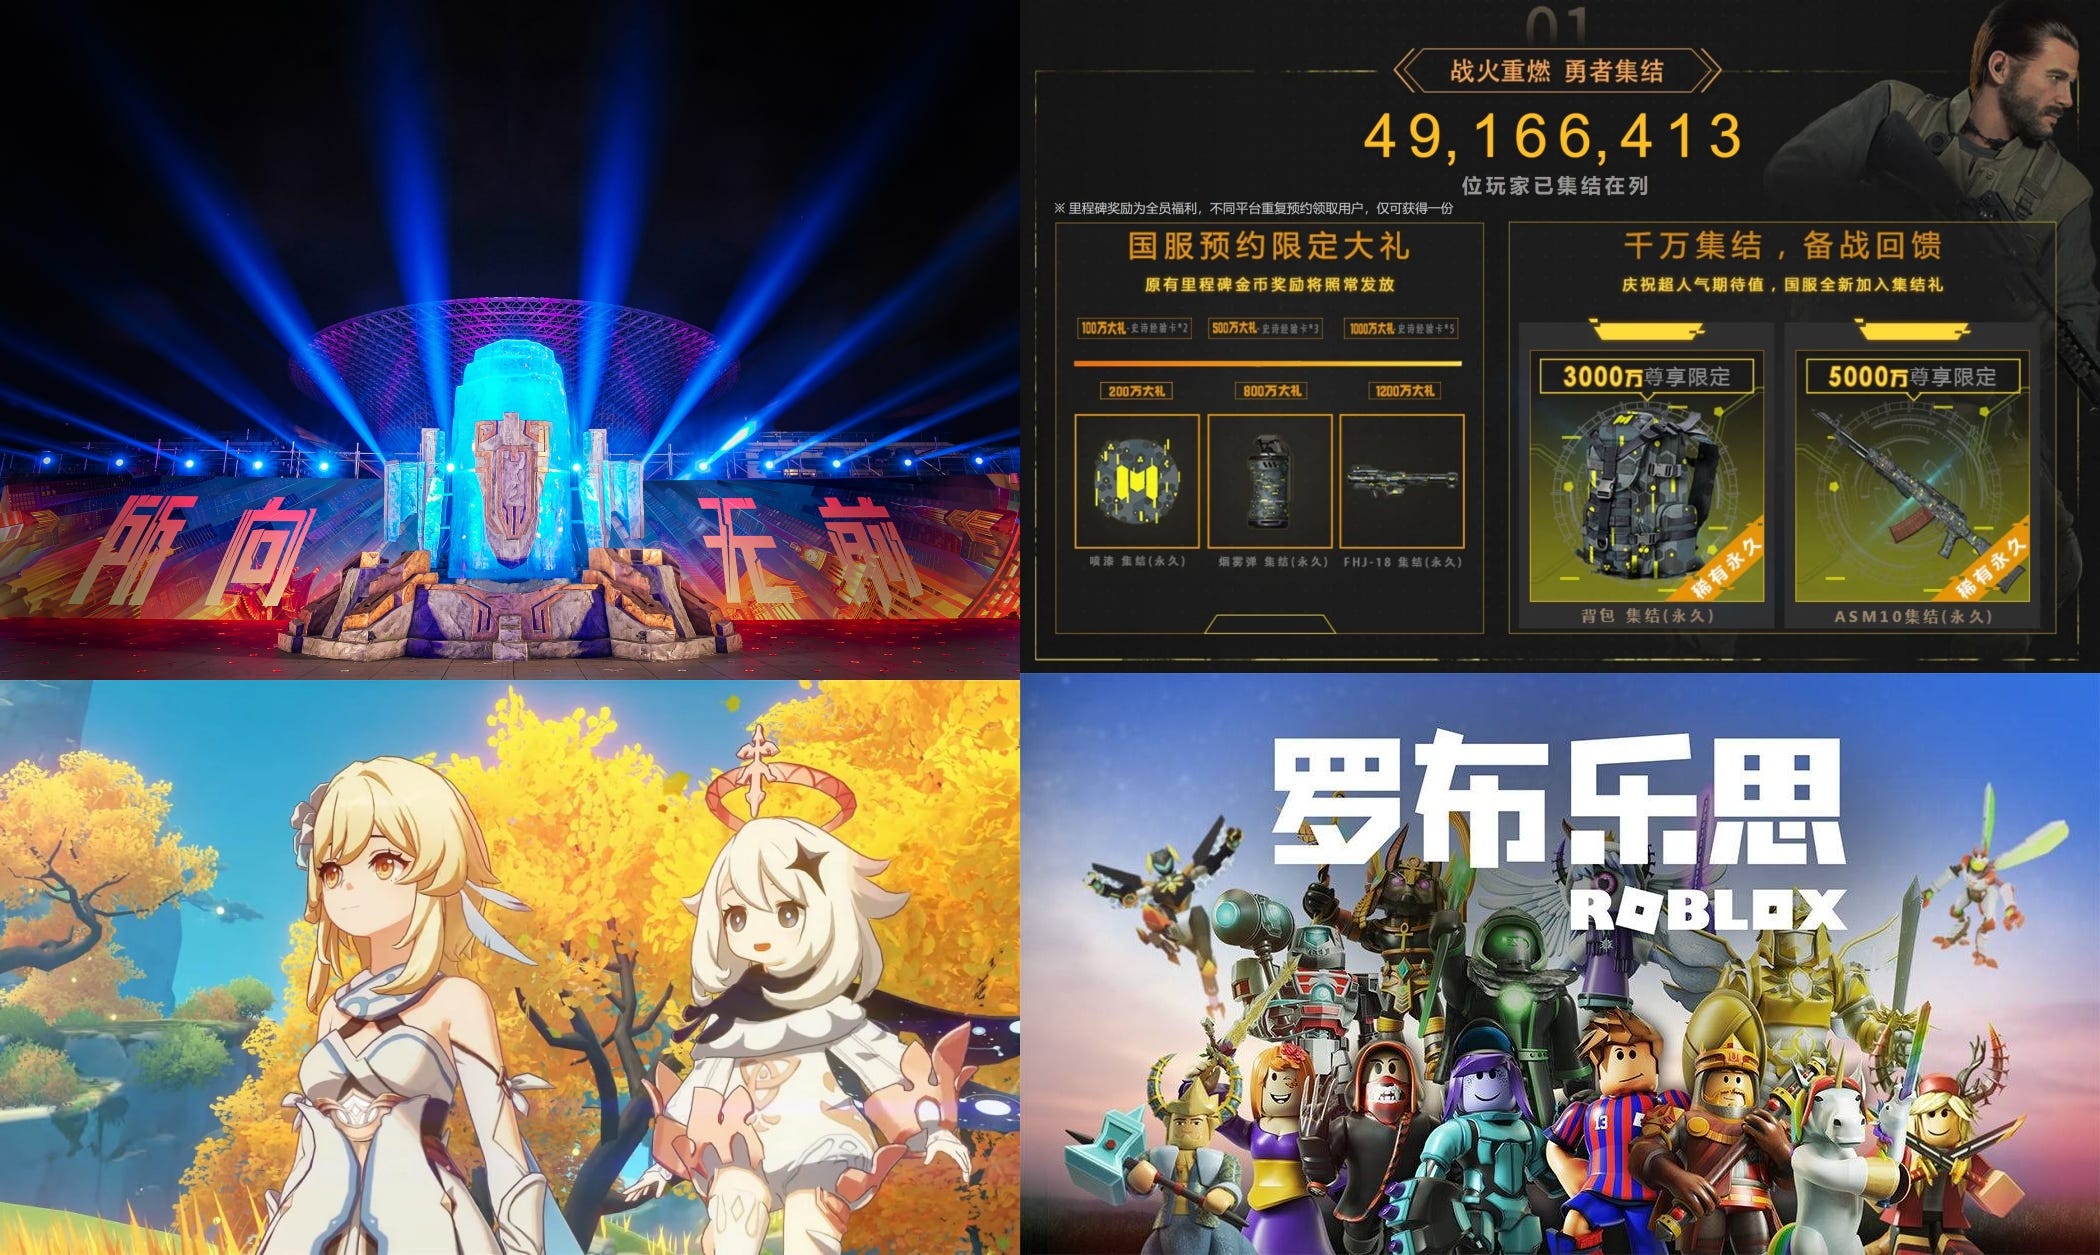 Genshin Makes History Roblox S Ipo And China Plans 50m Pre Reg For Cod Mobile In China Lol Worlds In Shanghai China Gaming News Roundup 7 - roblox cod amazon